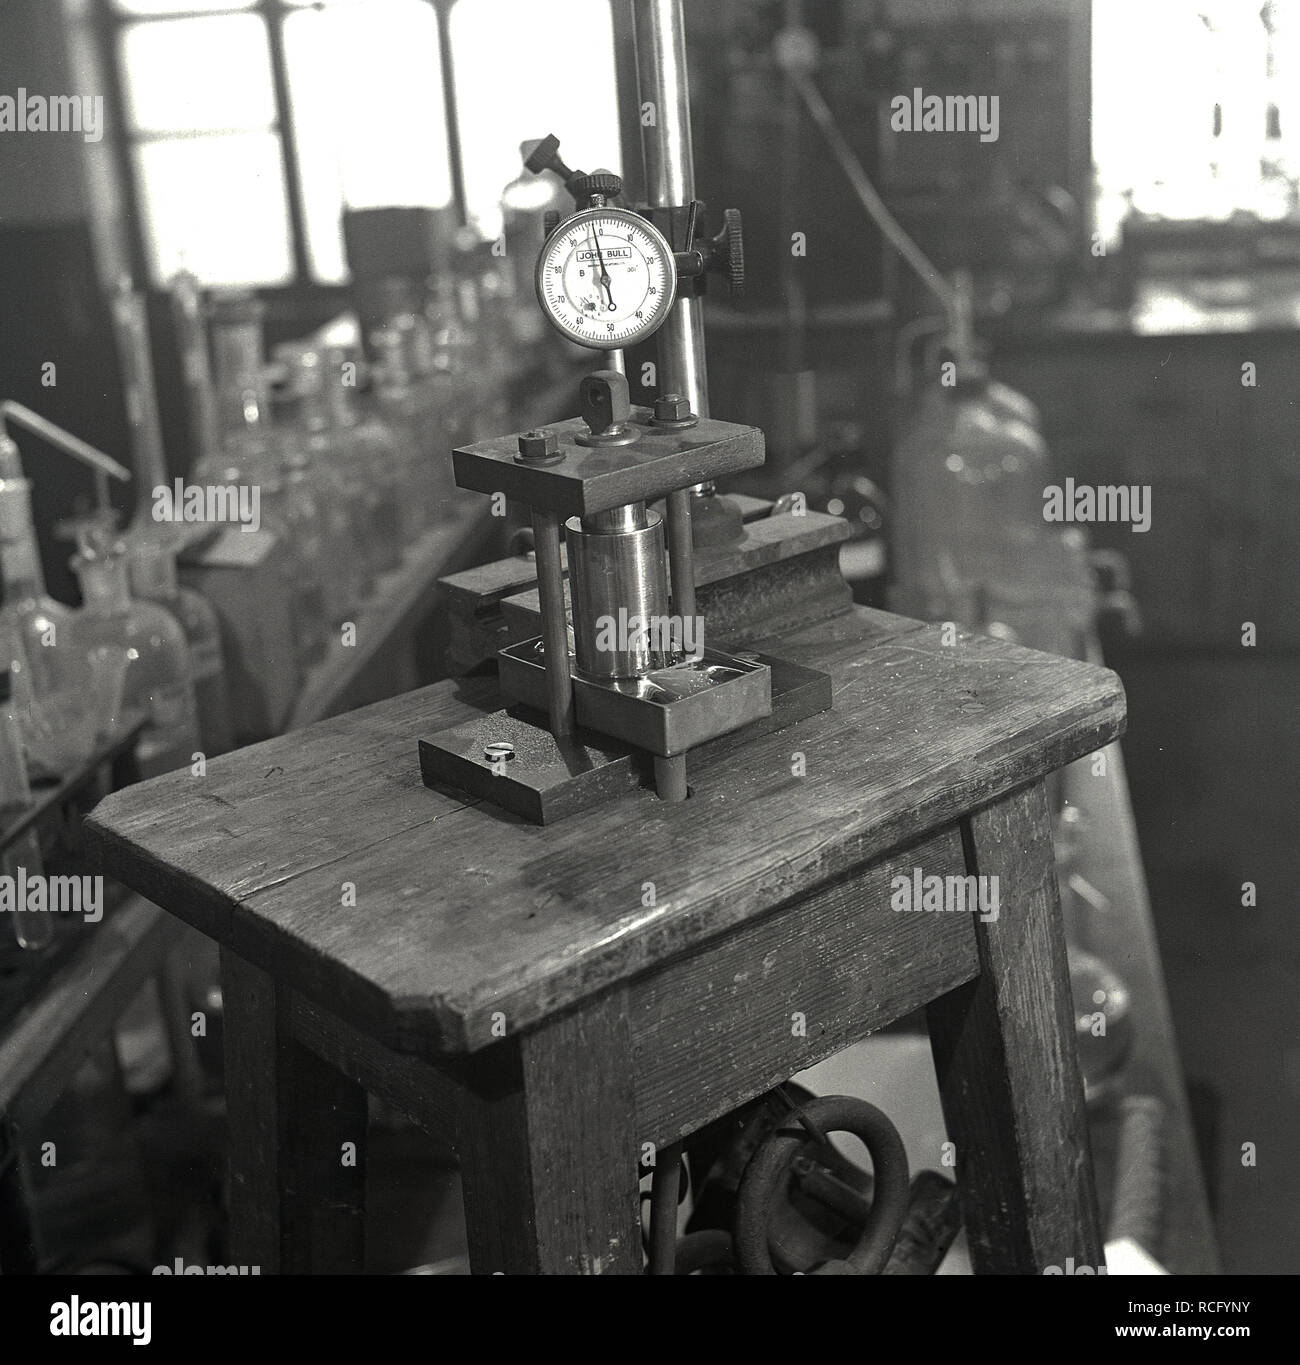 1950s, historical, a science laboratory, on a small wooden work bench, a 'John Bull' instrument, a dial test gauge fixed on table, Leeds University, Leeds, England, UK. The 'John Bull' testing equipment of the era was made British Indicators Ltd of Pickford Rd, St Albans, England, UK, a leading manufacturer of precision internal gauging and measuring equipment. Stock Photo